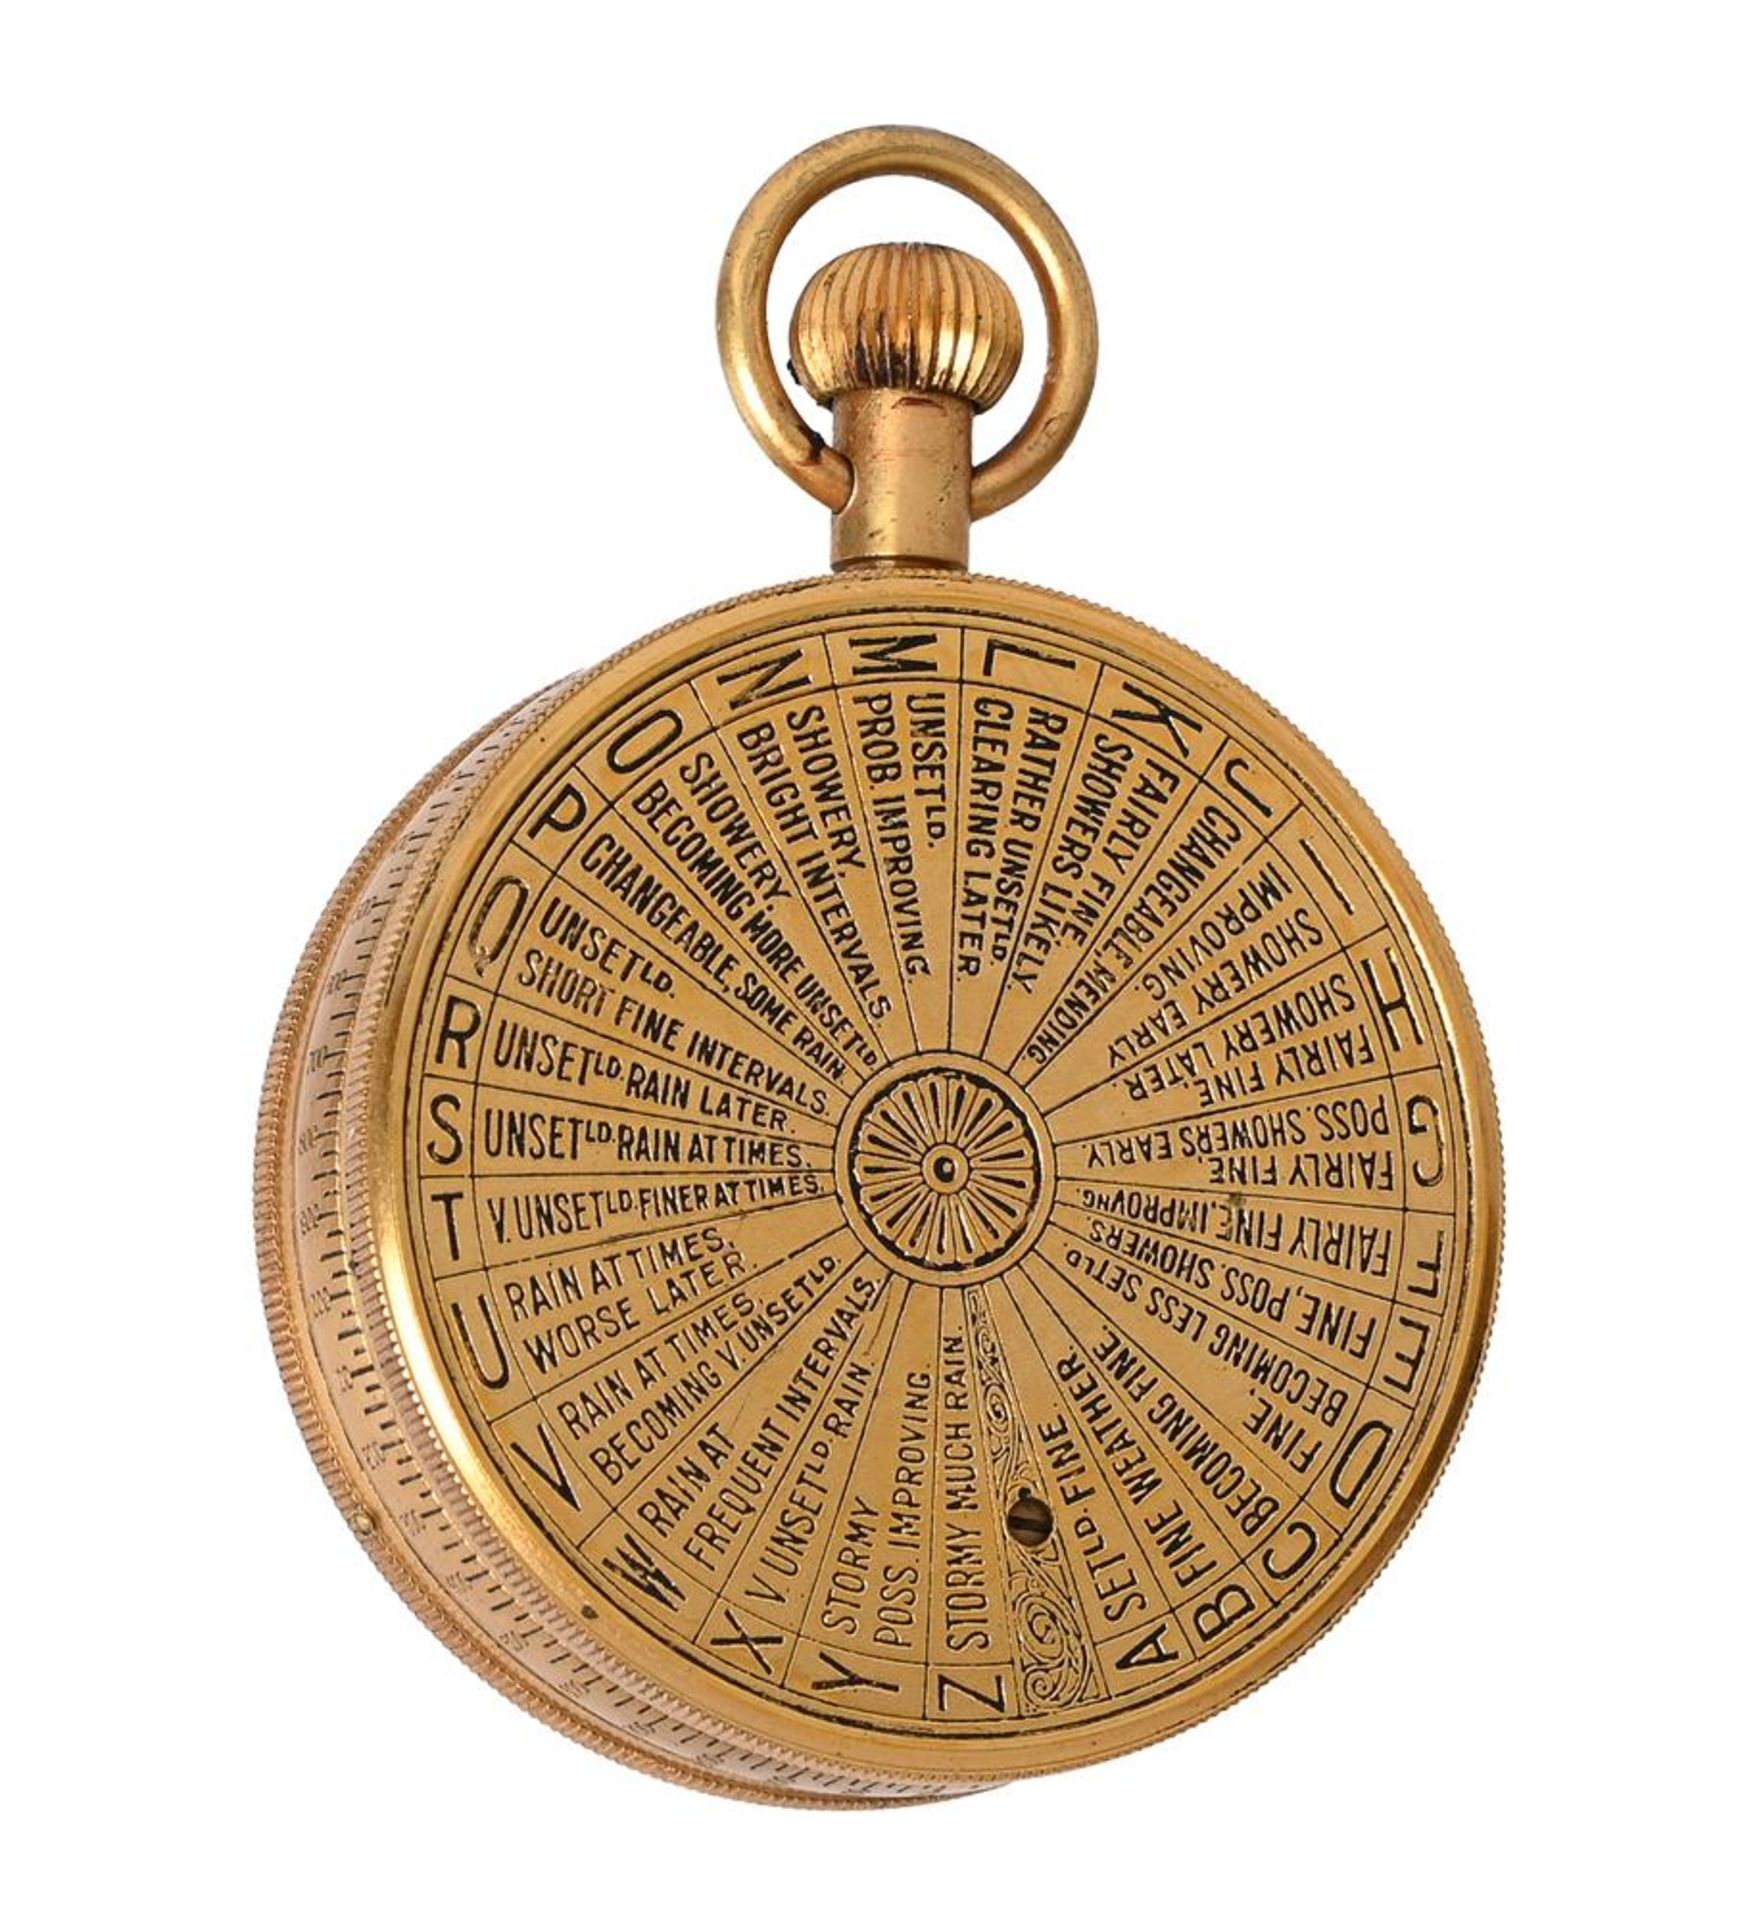 A GILT BRASS ANEROID POCKET WEATHER FORETELLER BOROMETER OR ‘WEATHER WATCH’ - Image 4 of 5